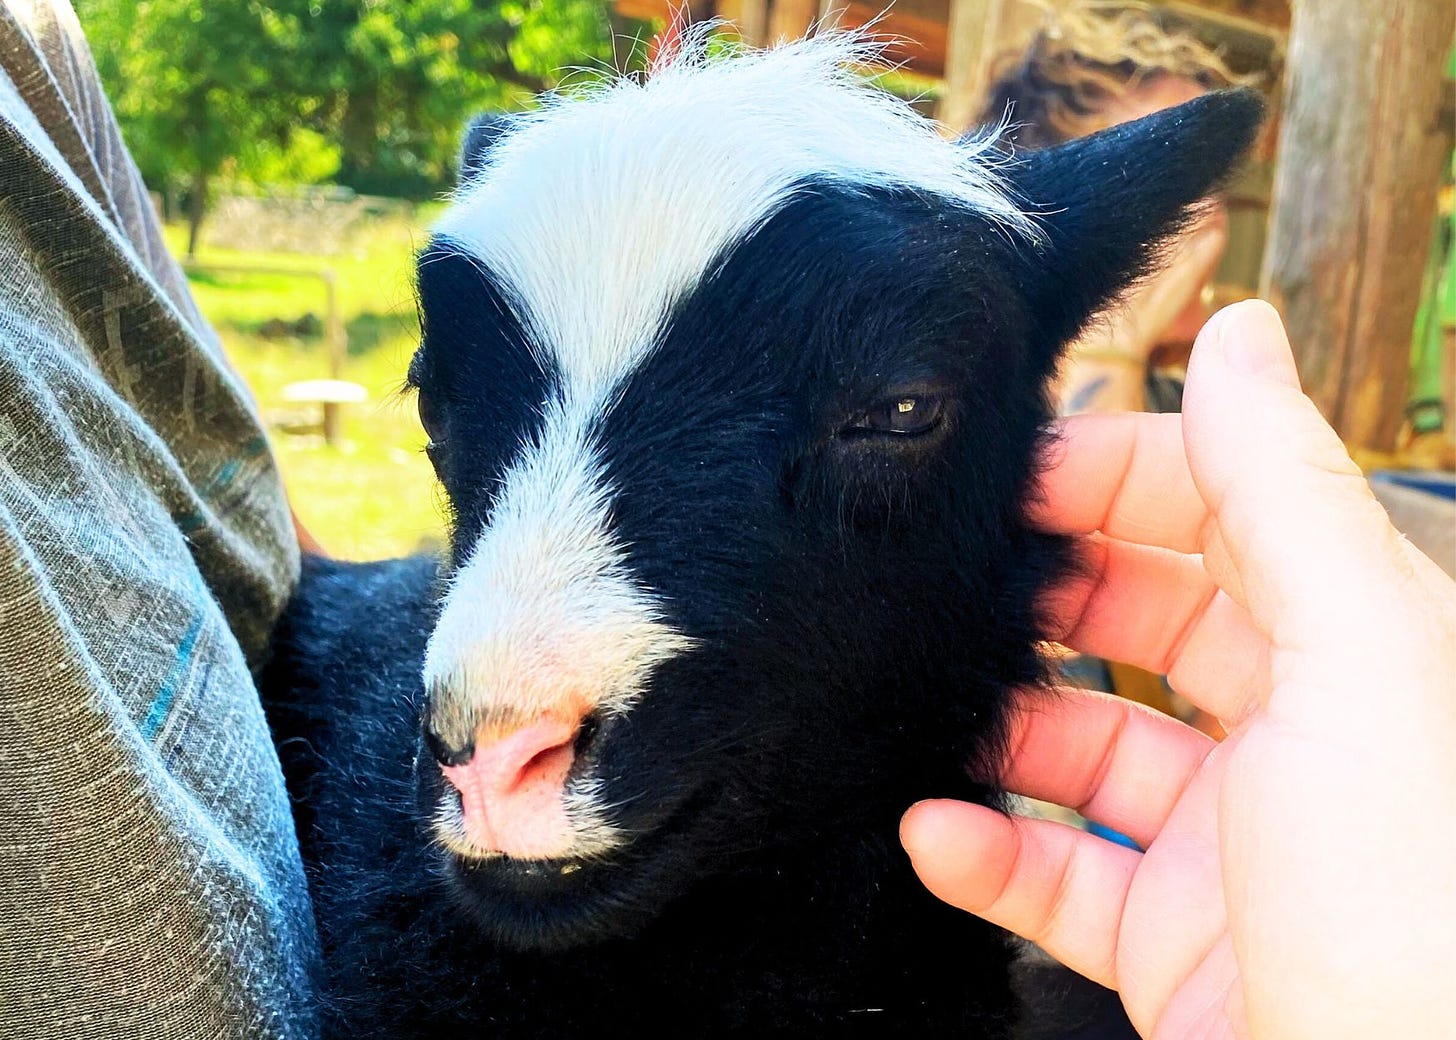 A baby goat being held and pet.